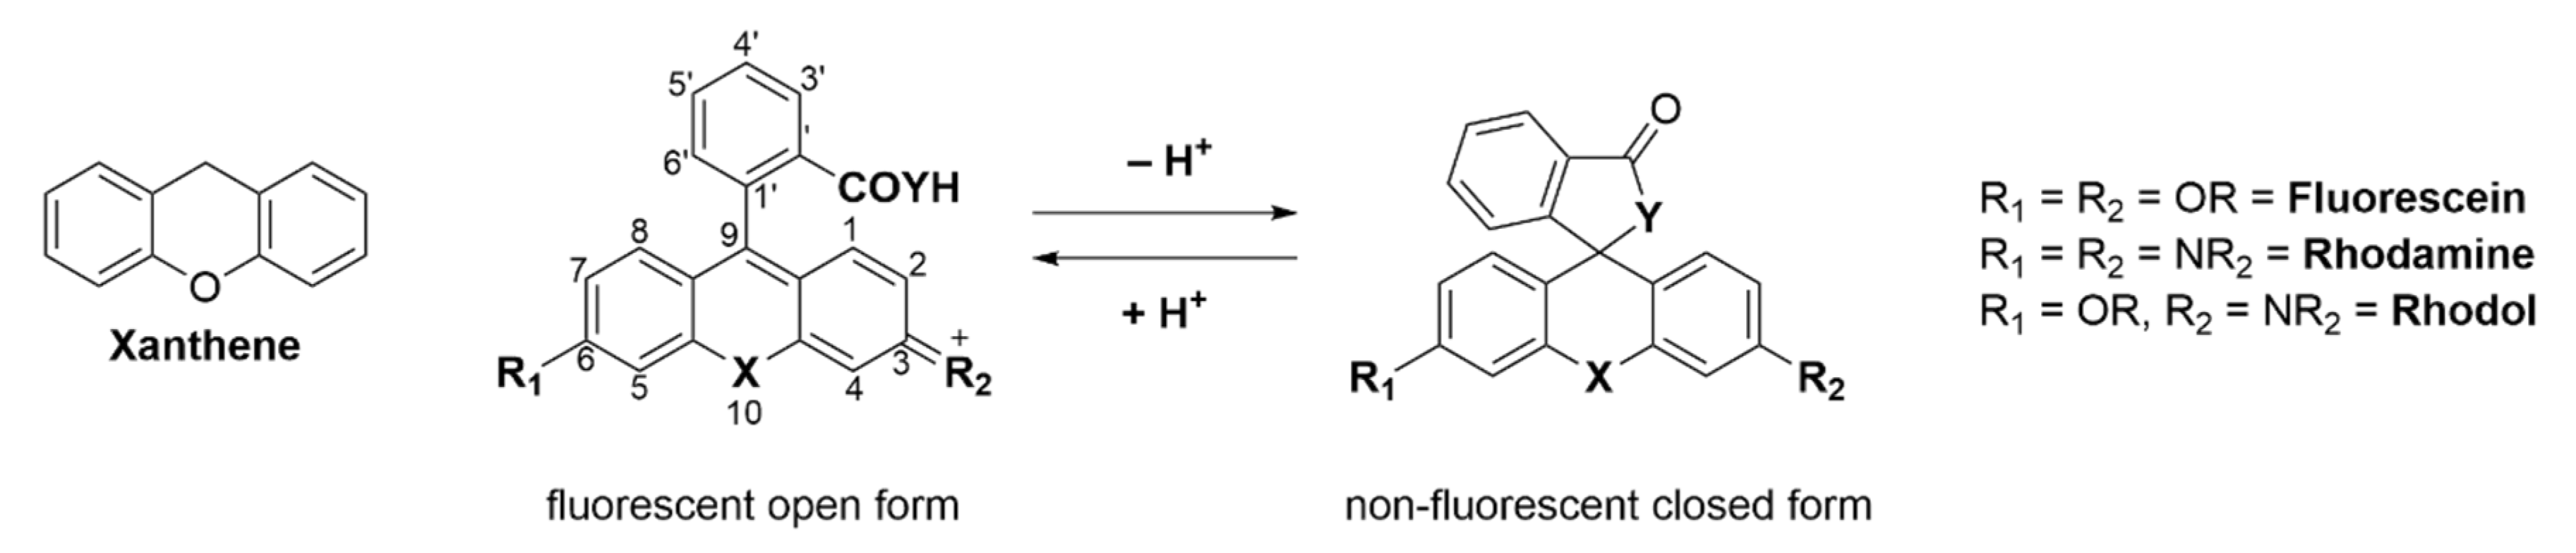 Molecules | Free Full-Text | Recent Progress in Small Spirocyclic, Xanthene-Based  Fluorescent Probes